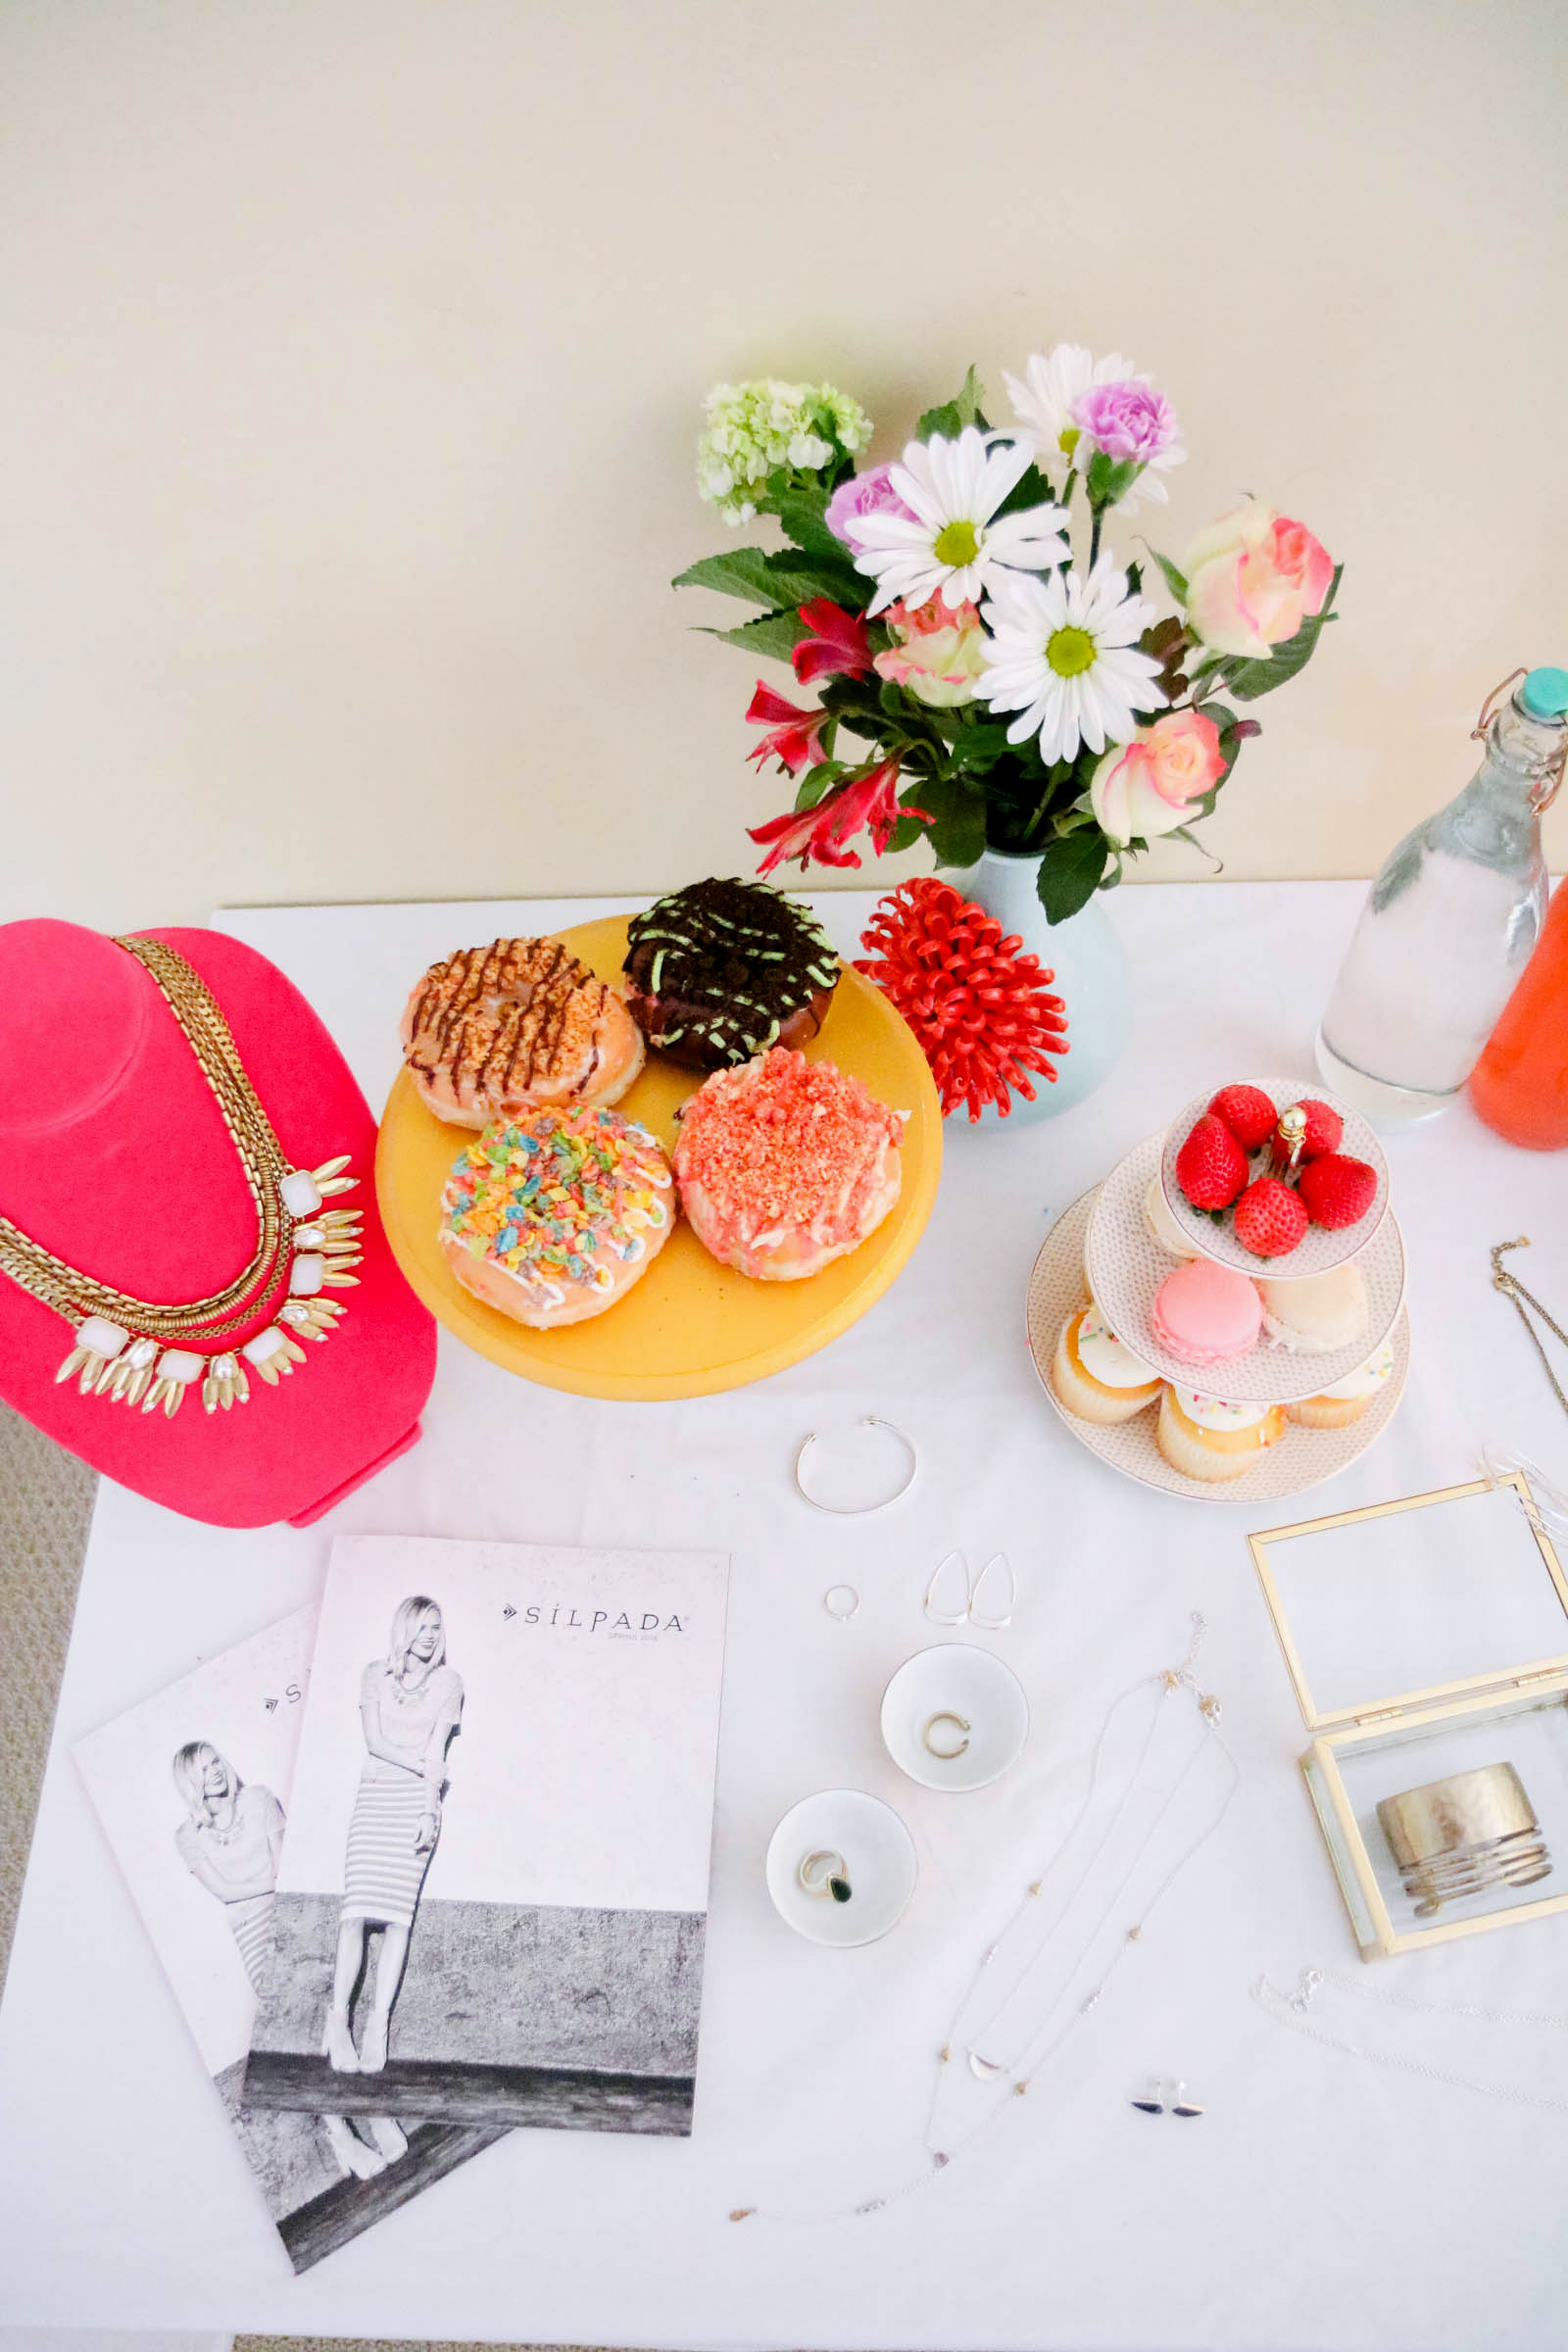 How to style a dessert table